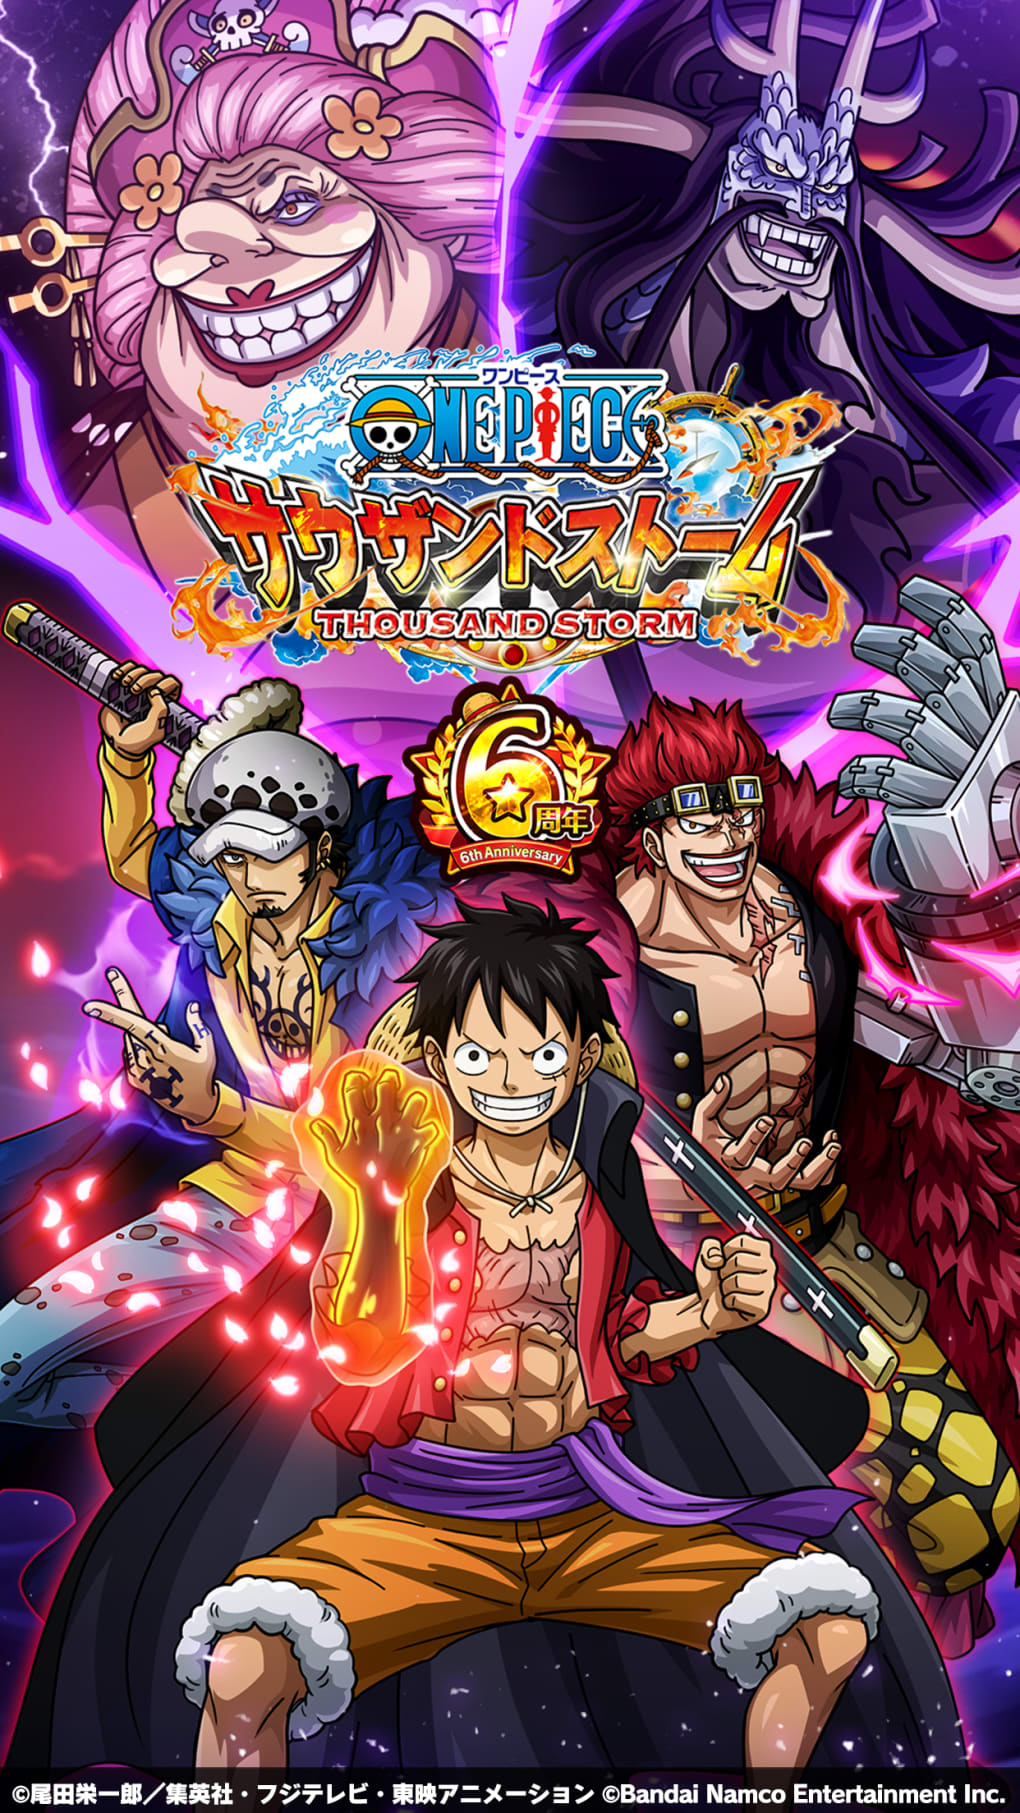 ONE PIECE サウザンドストーム para iPhone - Download